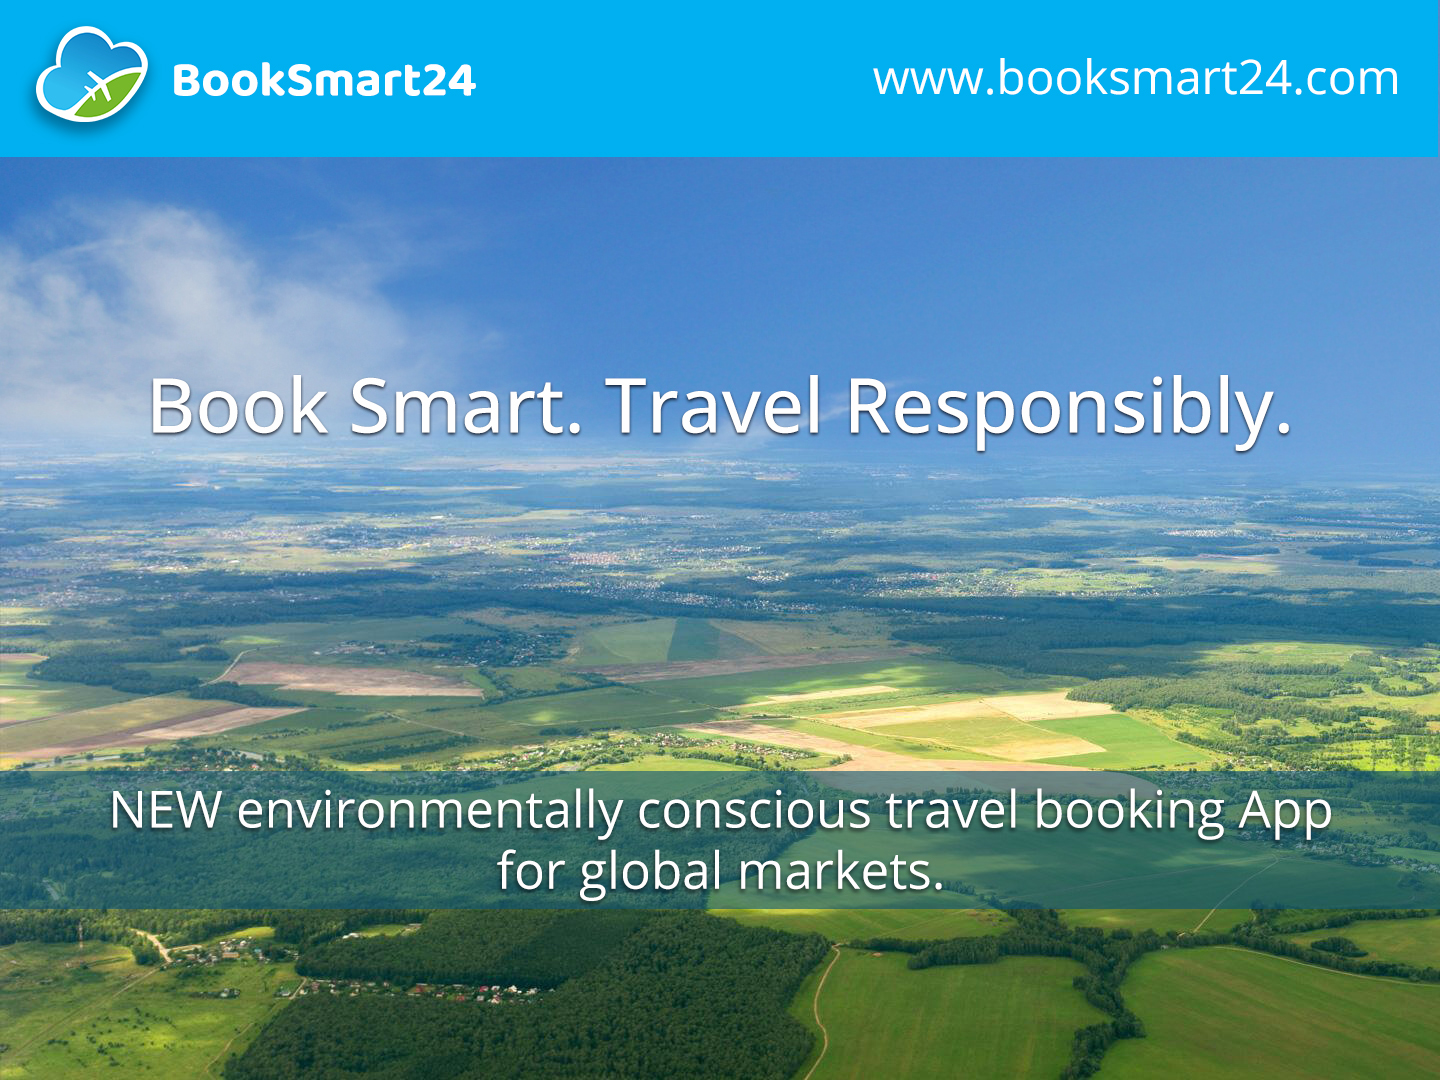 Fields and sky reads: Book Smart. Travel Responsibly.